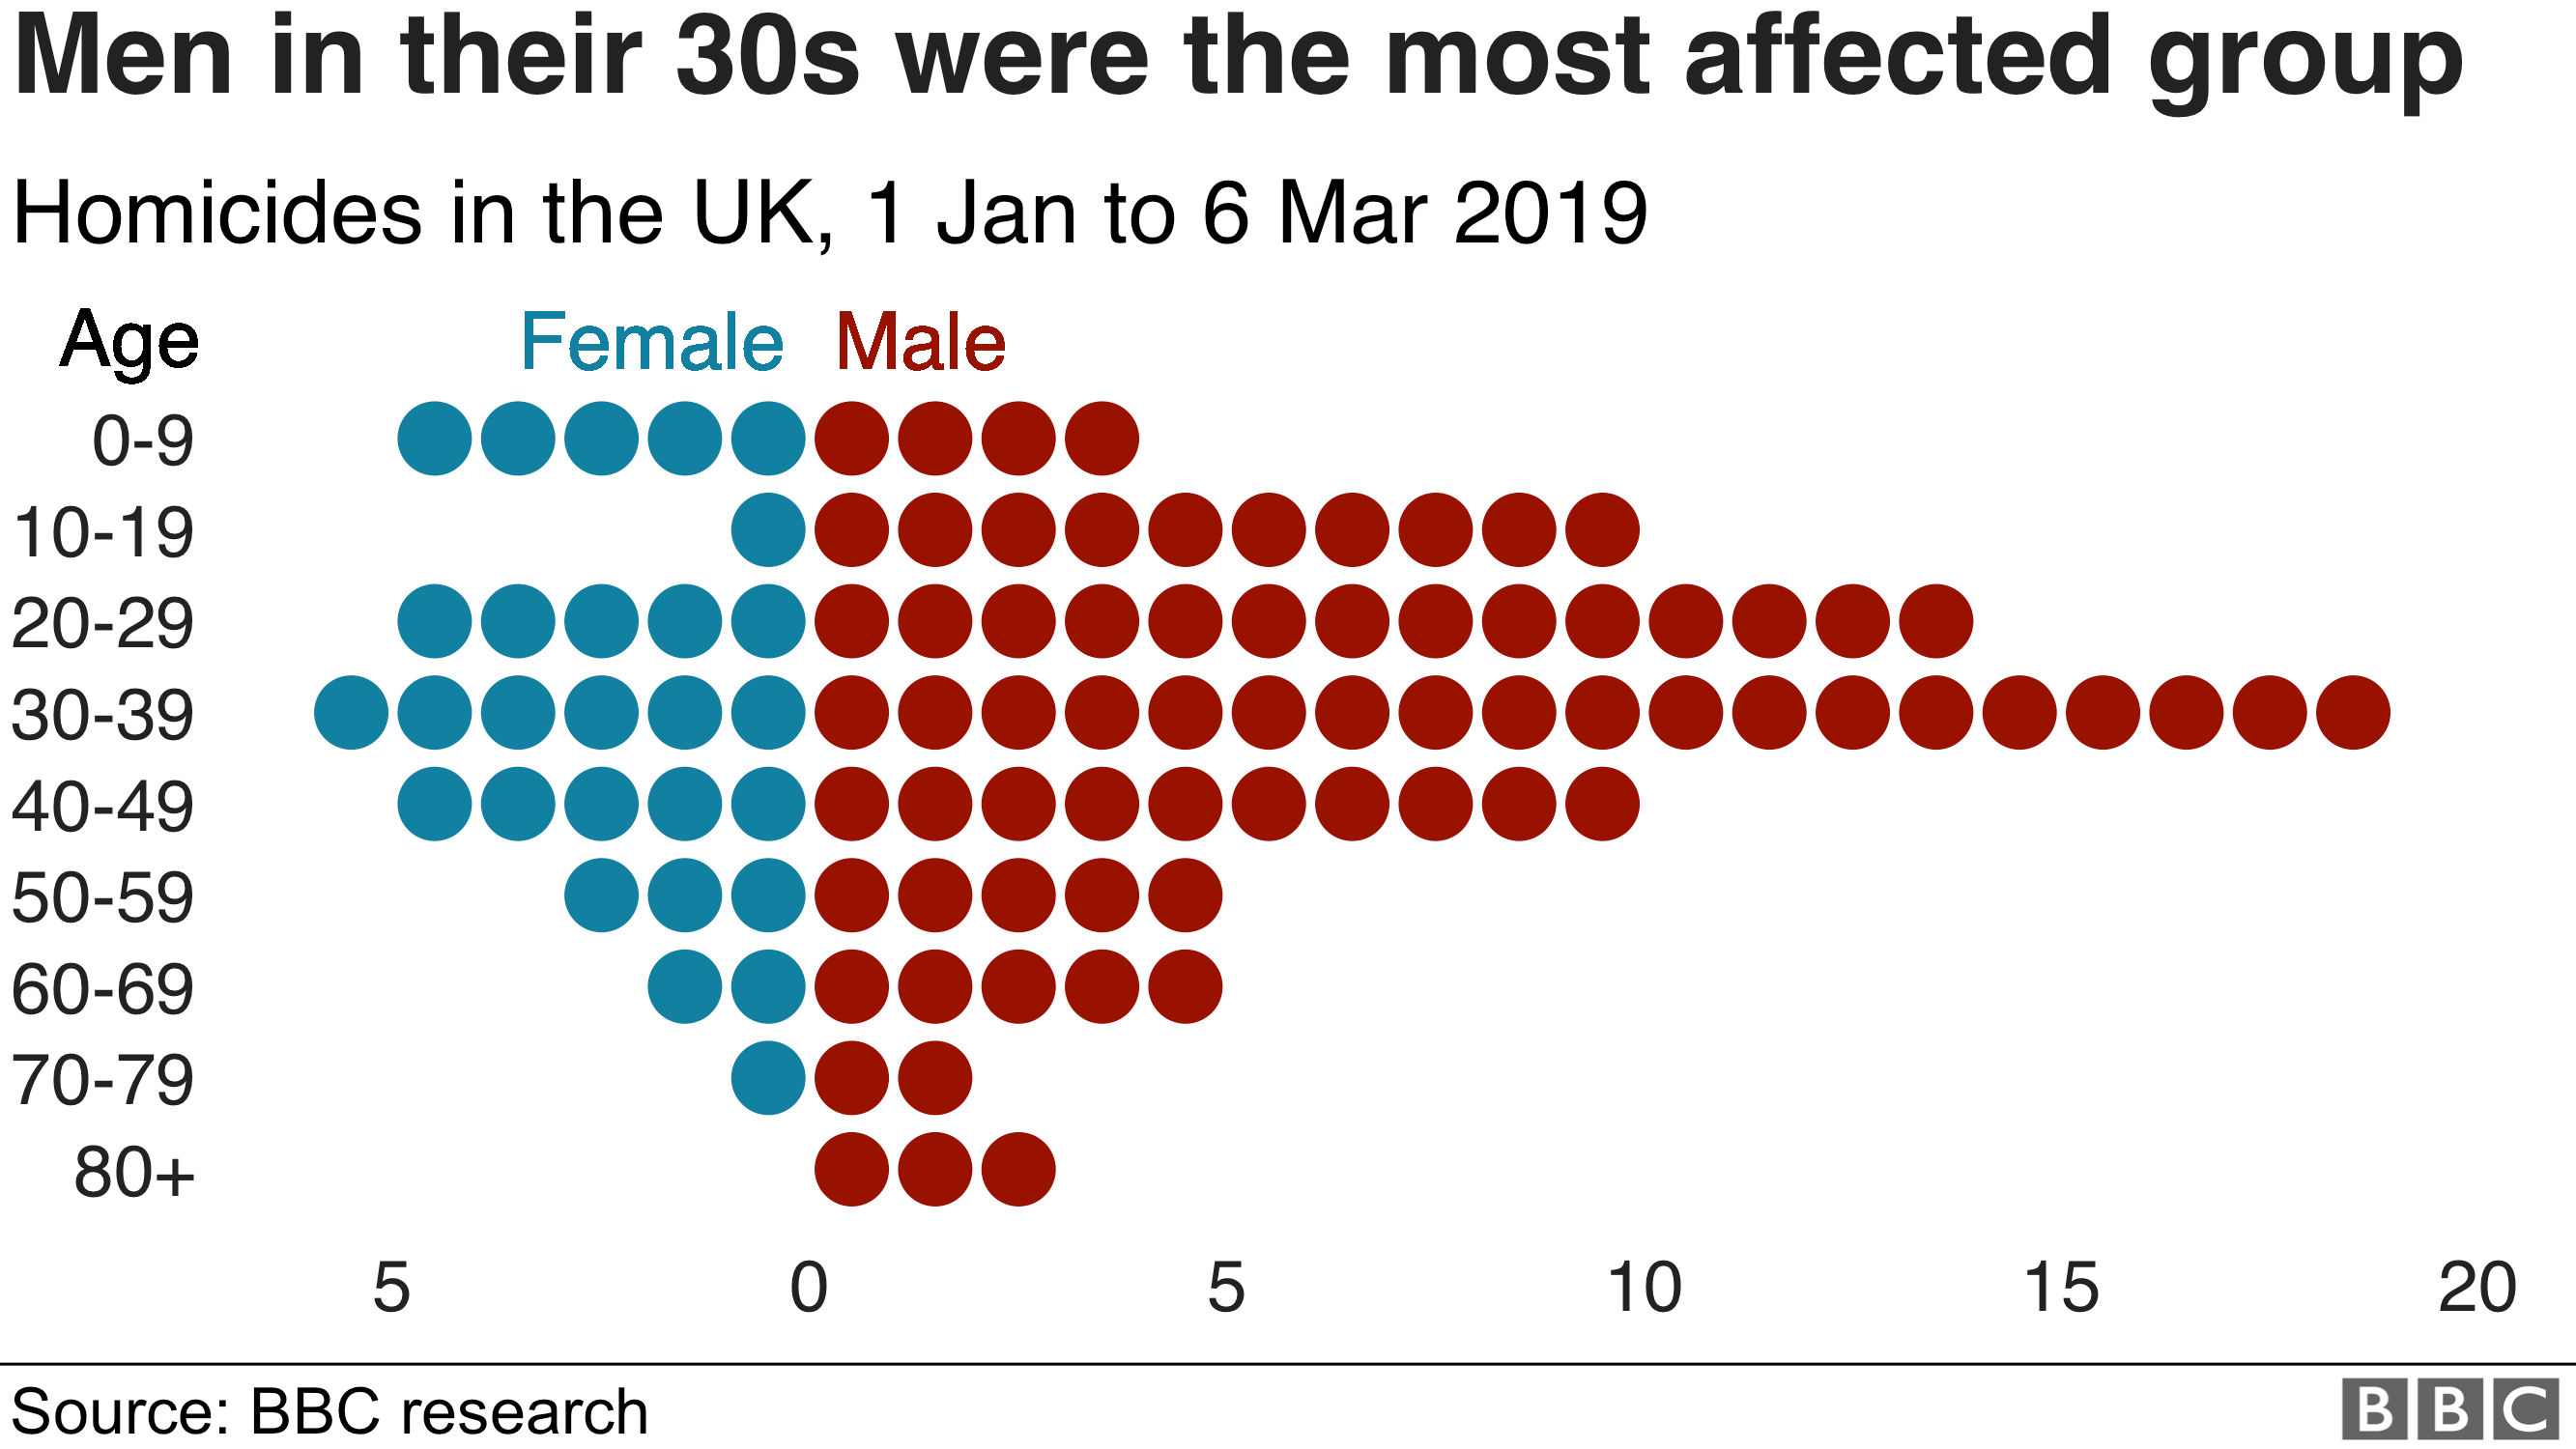 Men in their 30s were the most affected group